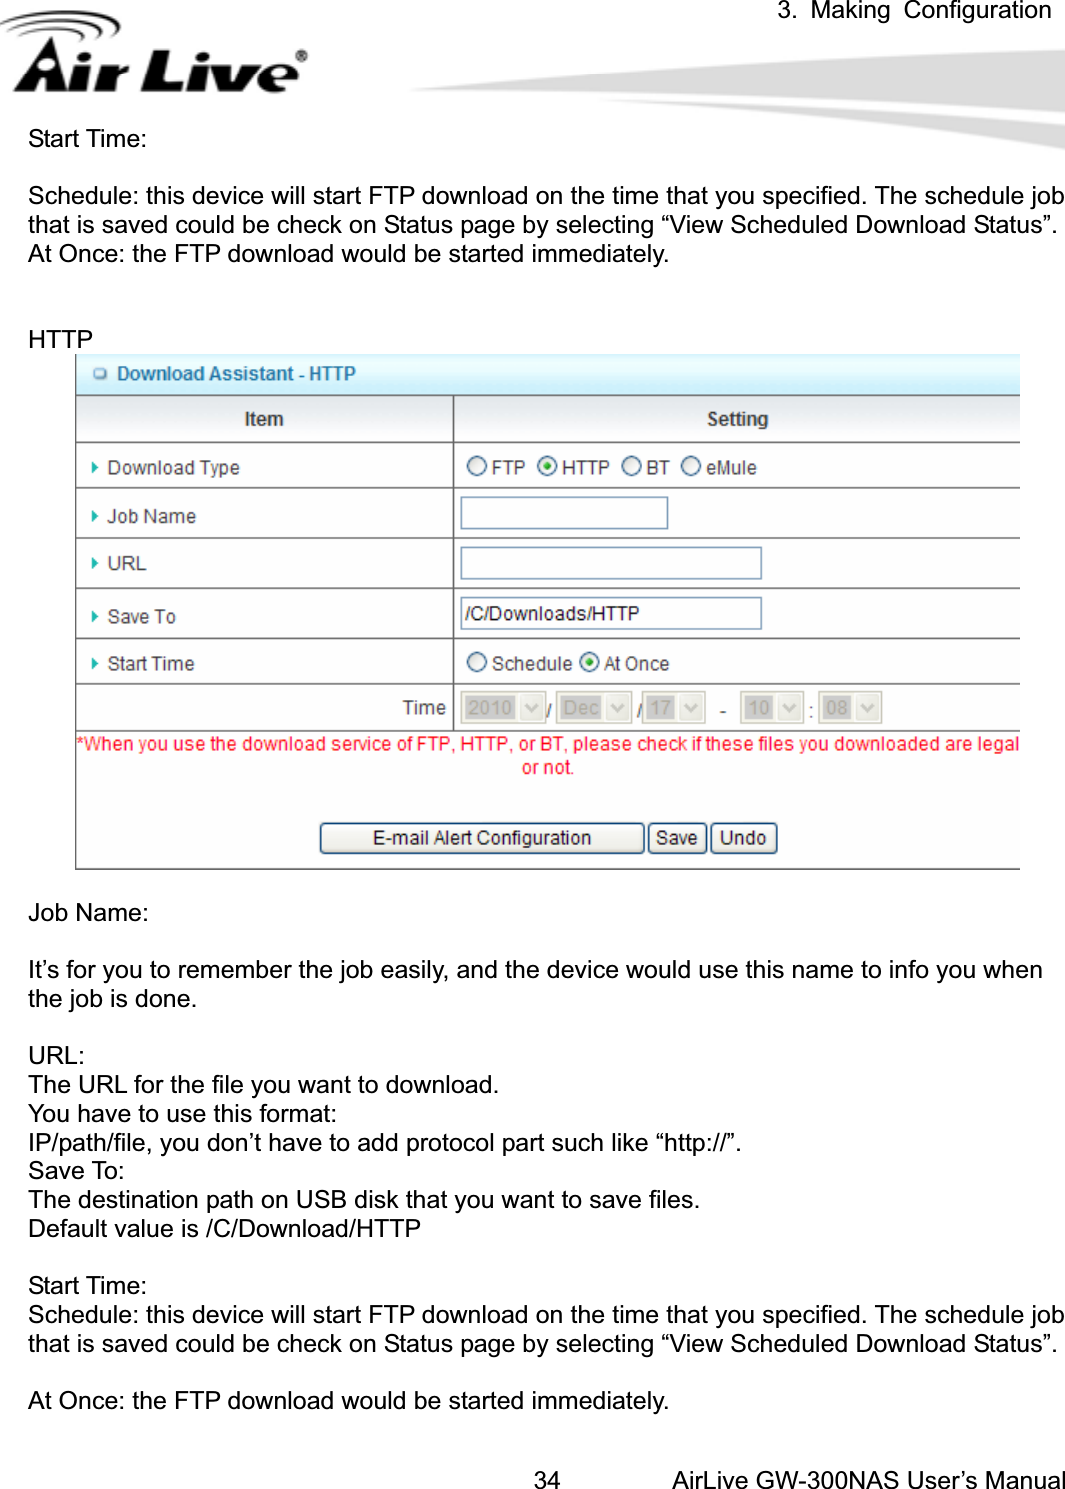 3. Making ConfigurationAirLive GW-300NAS User’s Manual34Start Time: Schedule: this device will start FTP download on the time that you specified. The schedule job that is saved could be check on Status page by selecting “View Scheduled Download Status”. At Once: the FTP download would be started immediately. HTTPJob Name: It’s for you to remember the job easily, and the device would use this name to info you when the job is done. URL:The URL for the file you want to download. You have to use this format: IP/path/file, you don’t have to add protocol part such like “http://”. Save To: The destination path on USB disk that you want to save files. Default value is /C/Download/HTTP Start Time: Schedule: this device will start FTP download on the time that you specified. The schedule job that is saved could be check on Status page by selecting “View Scheduled Download Status”. At Once: the FTP download would be started immediately. 